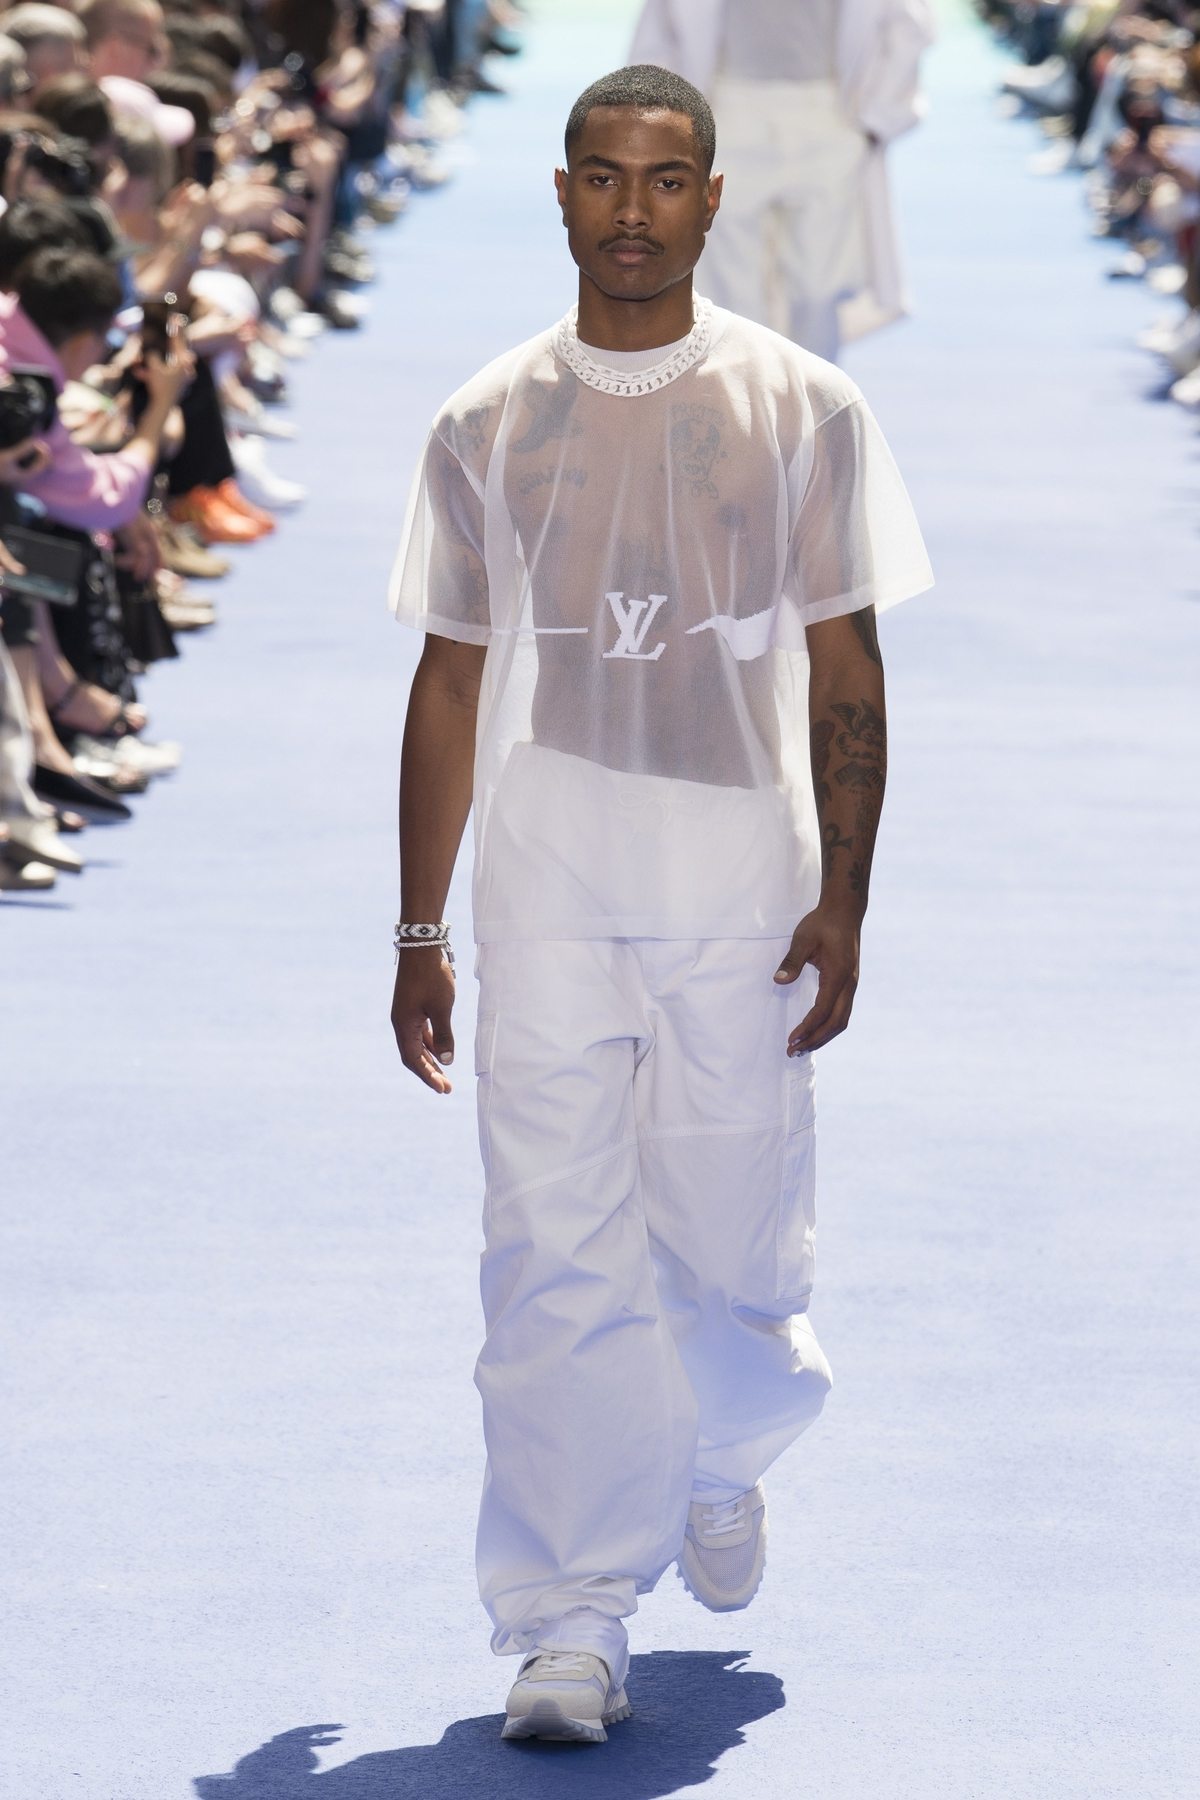 Steve Lacy: the musician who composes on an iPhone and walks the runway for Virgil Abloh